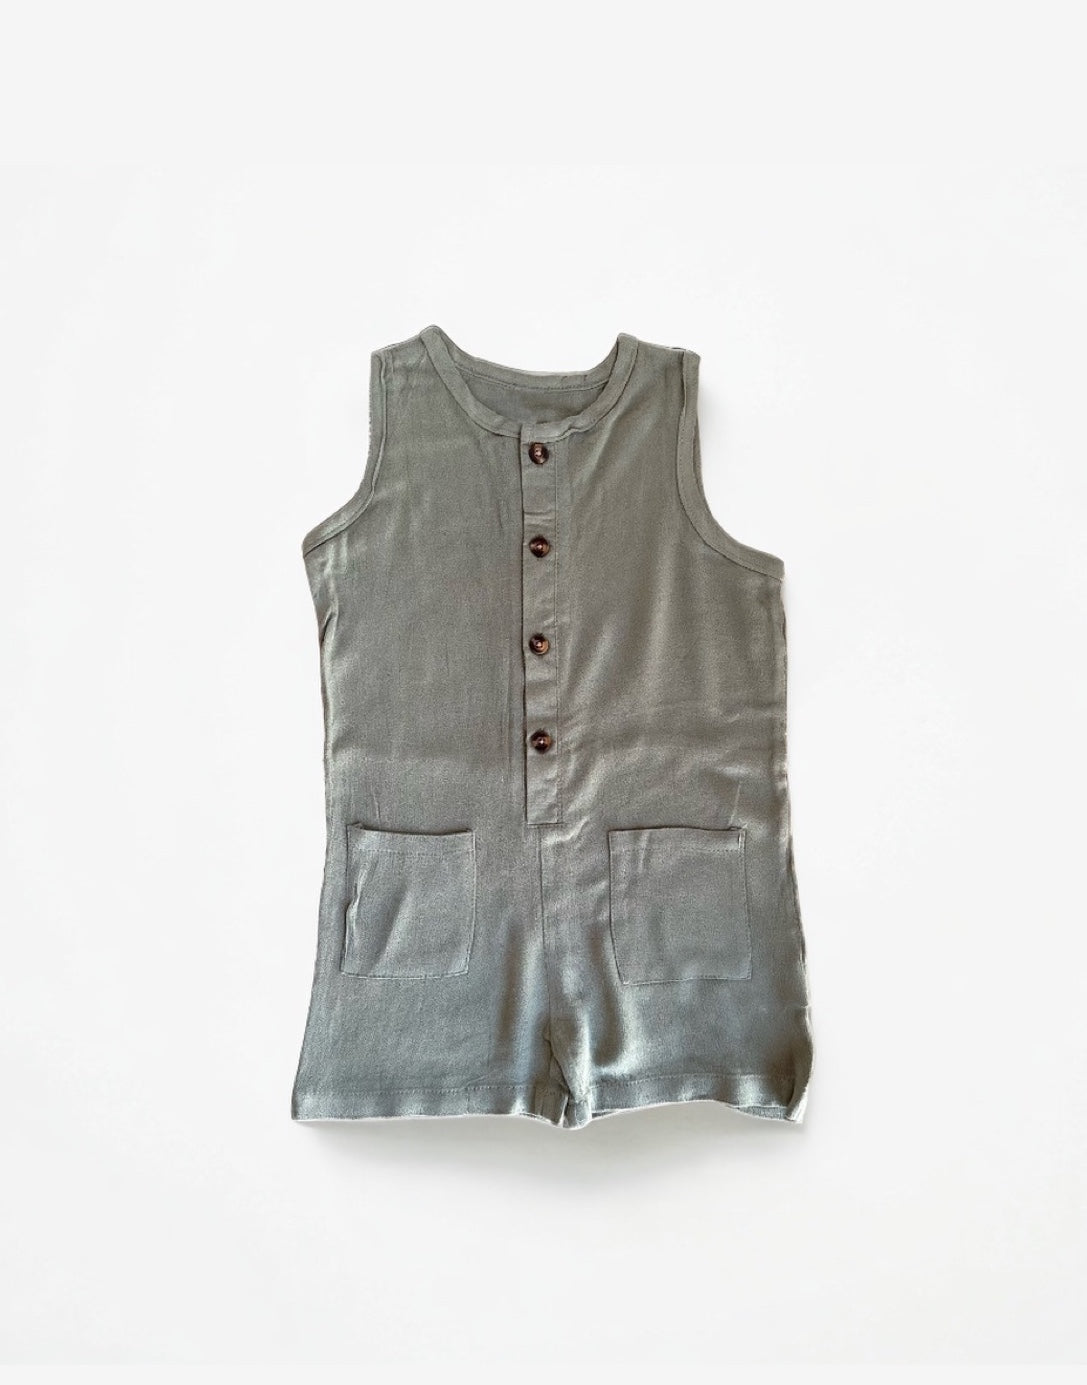 Front view of Sleeveless Button Down Romper.